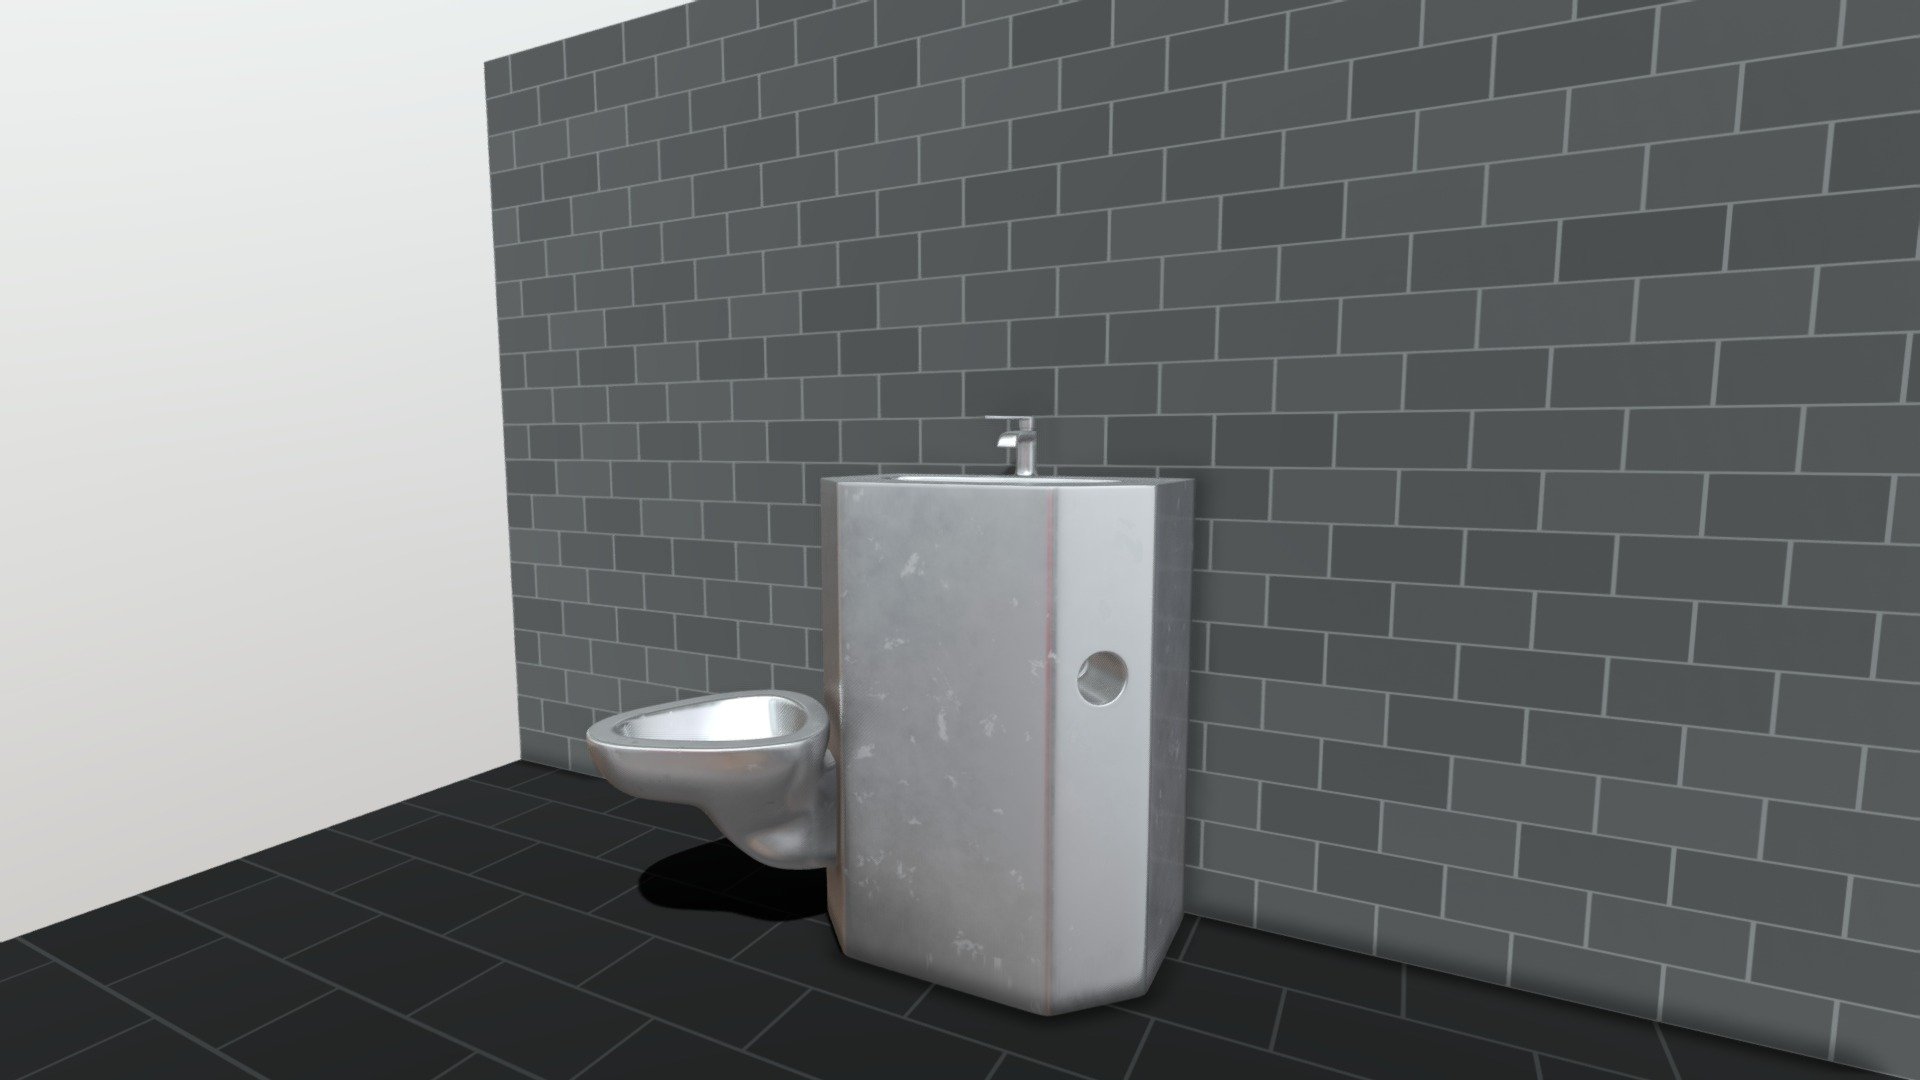 Toilet and Sink Unit